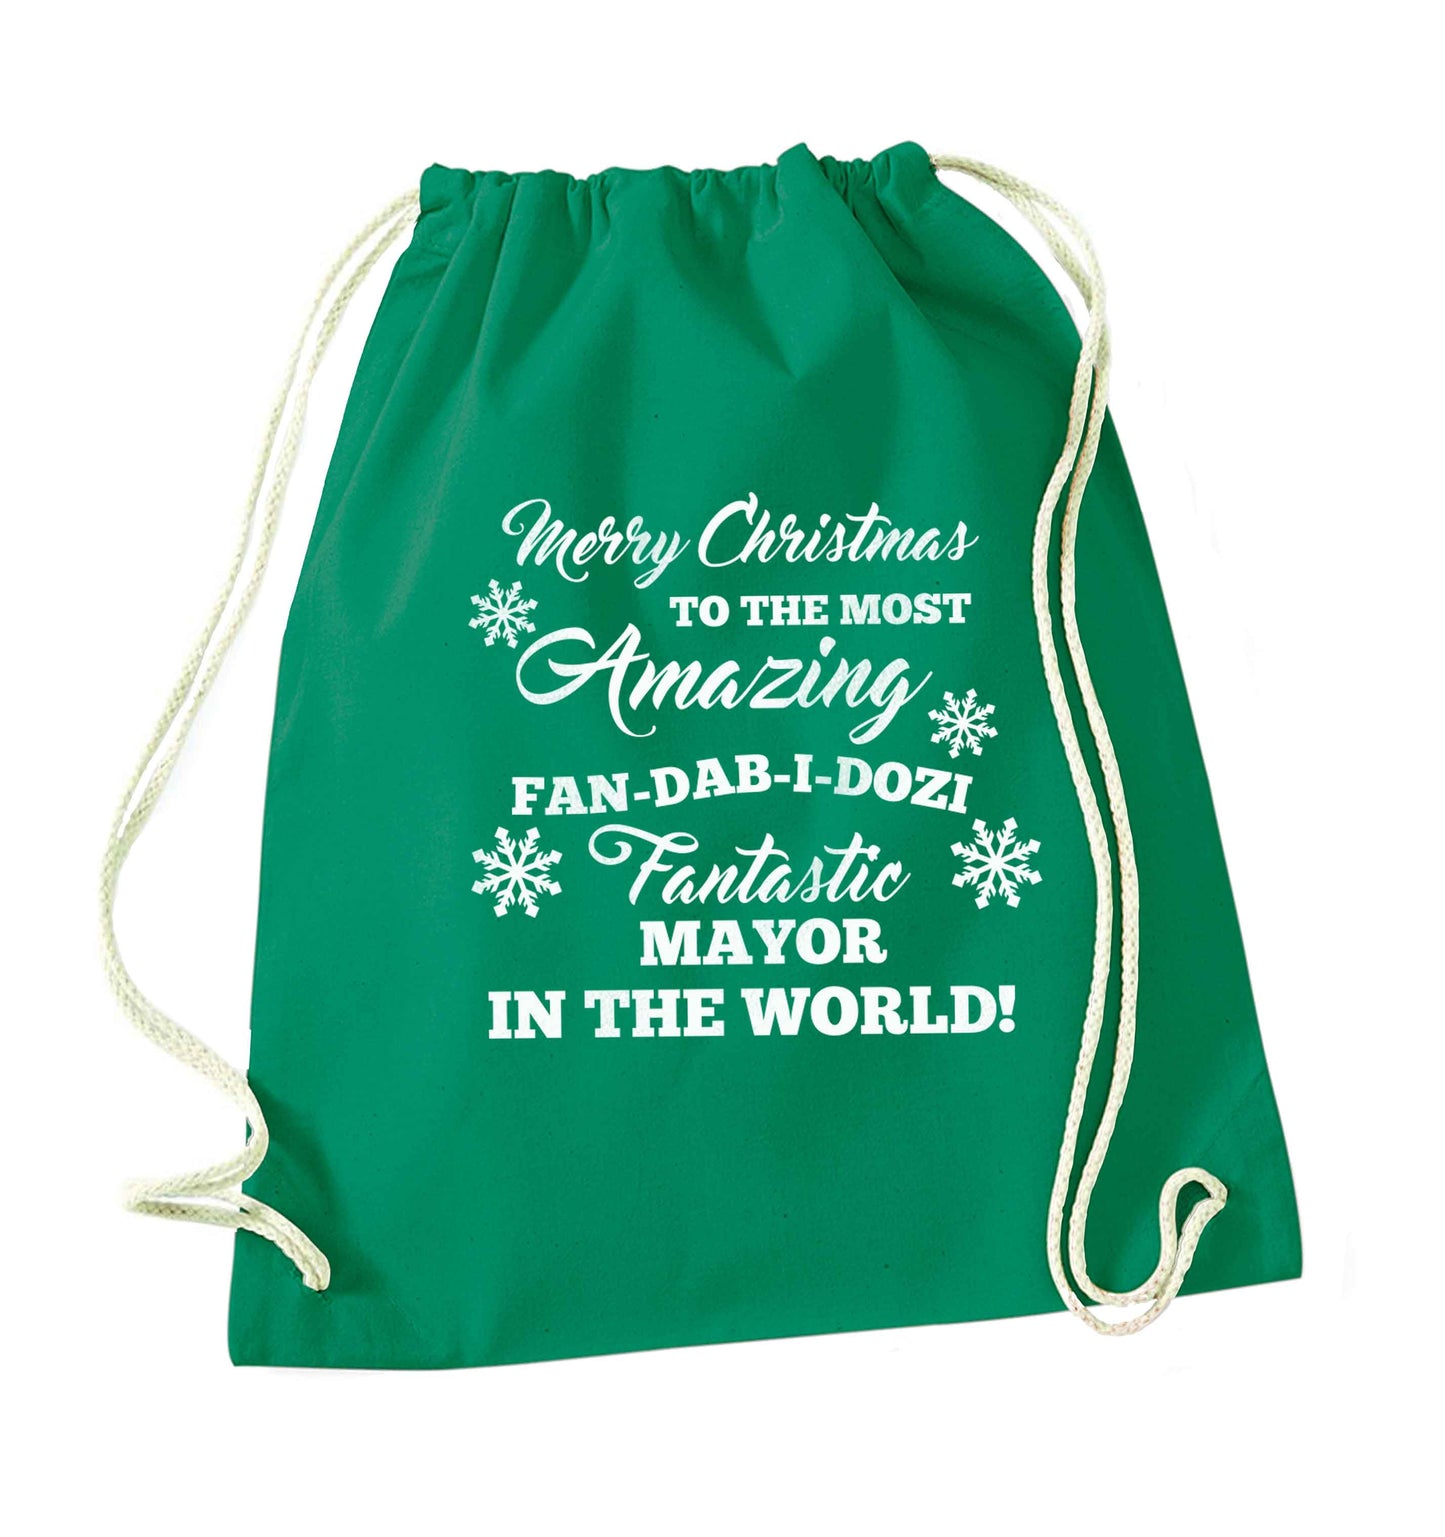 Merry Christmas to the most amazing fireman in the world! green drawstring bag